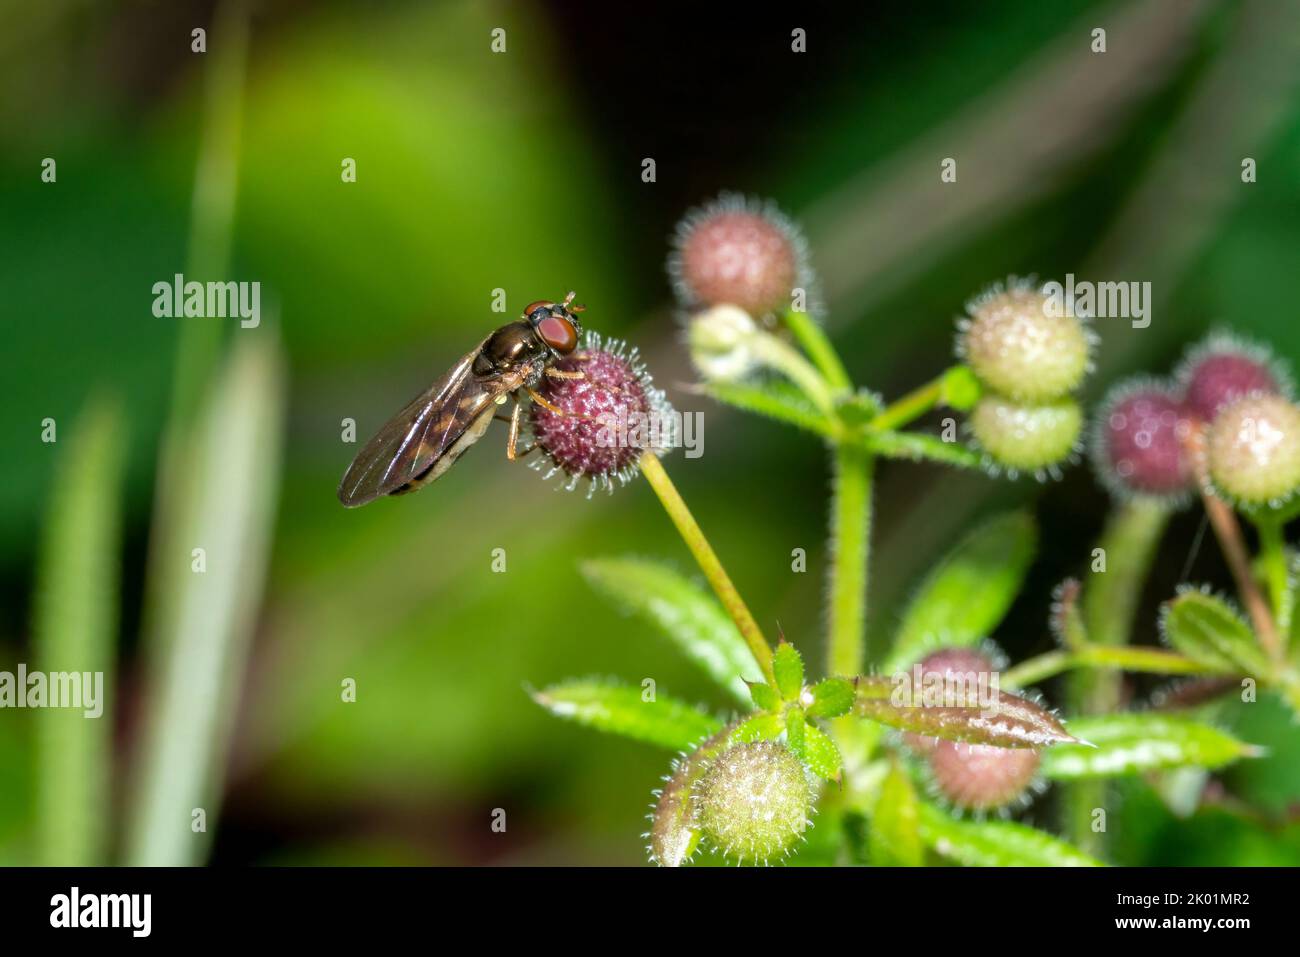 Hoverfly (Melanostoma scalare) a common flying insect species found in the UK and commonly known as chequered hoverfly, stock photo image Stock Photo